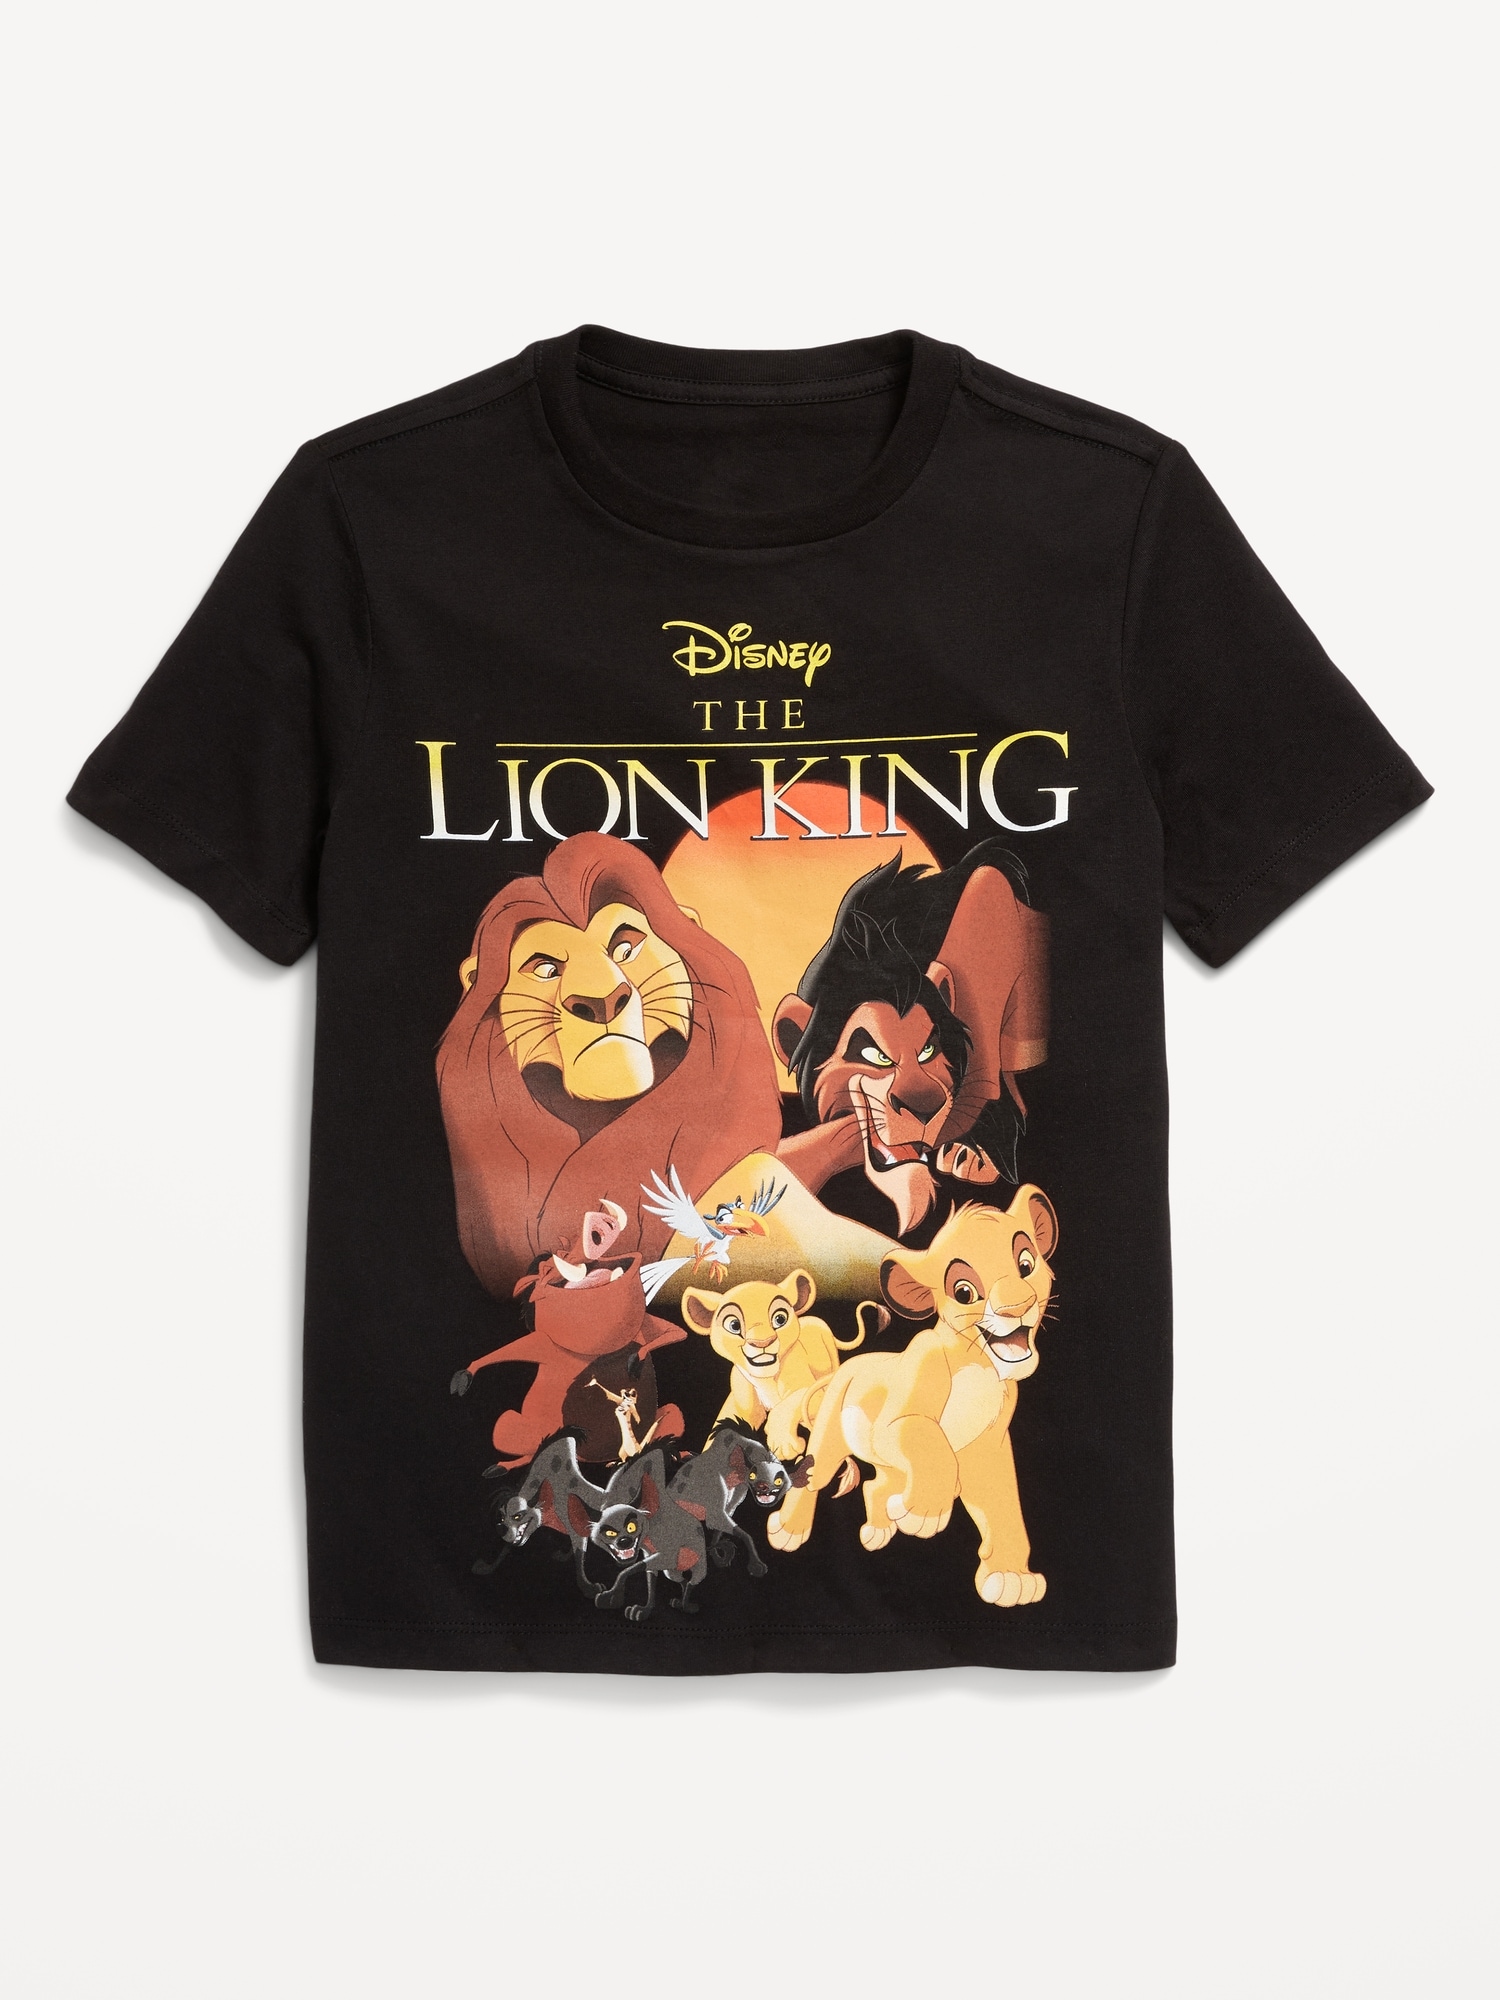 Disneyⓒ The Lion King Gender-Neutral Graphic T-Shirt for Kids